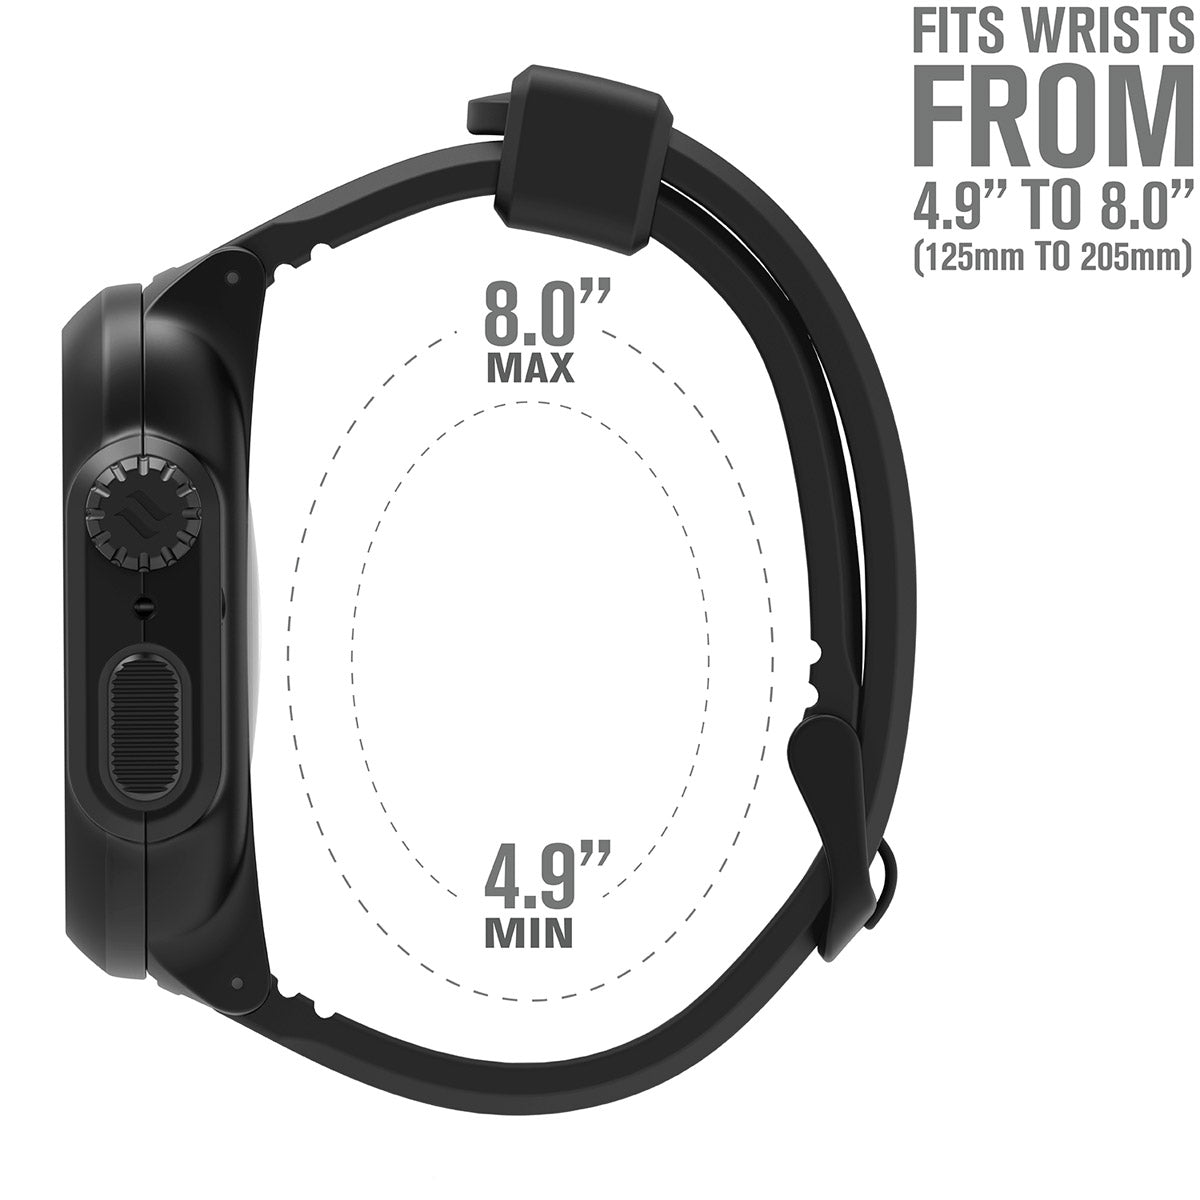 catalyst apple watch series 6 5 4 se gen 2 1 40mm 44mm waterproof case band stealth black side of the case with the minimum and maximum sizes of the sport band text reads 8.0" max 4.9" min fits wrists from 4.9" to 8.0"(125mm to 205mm)